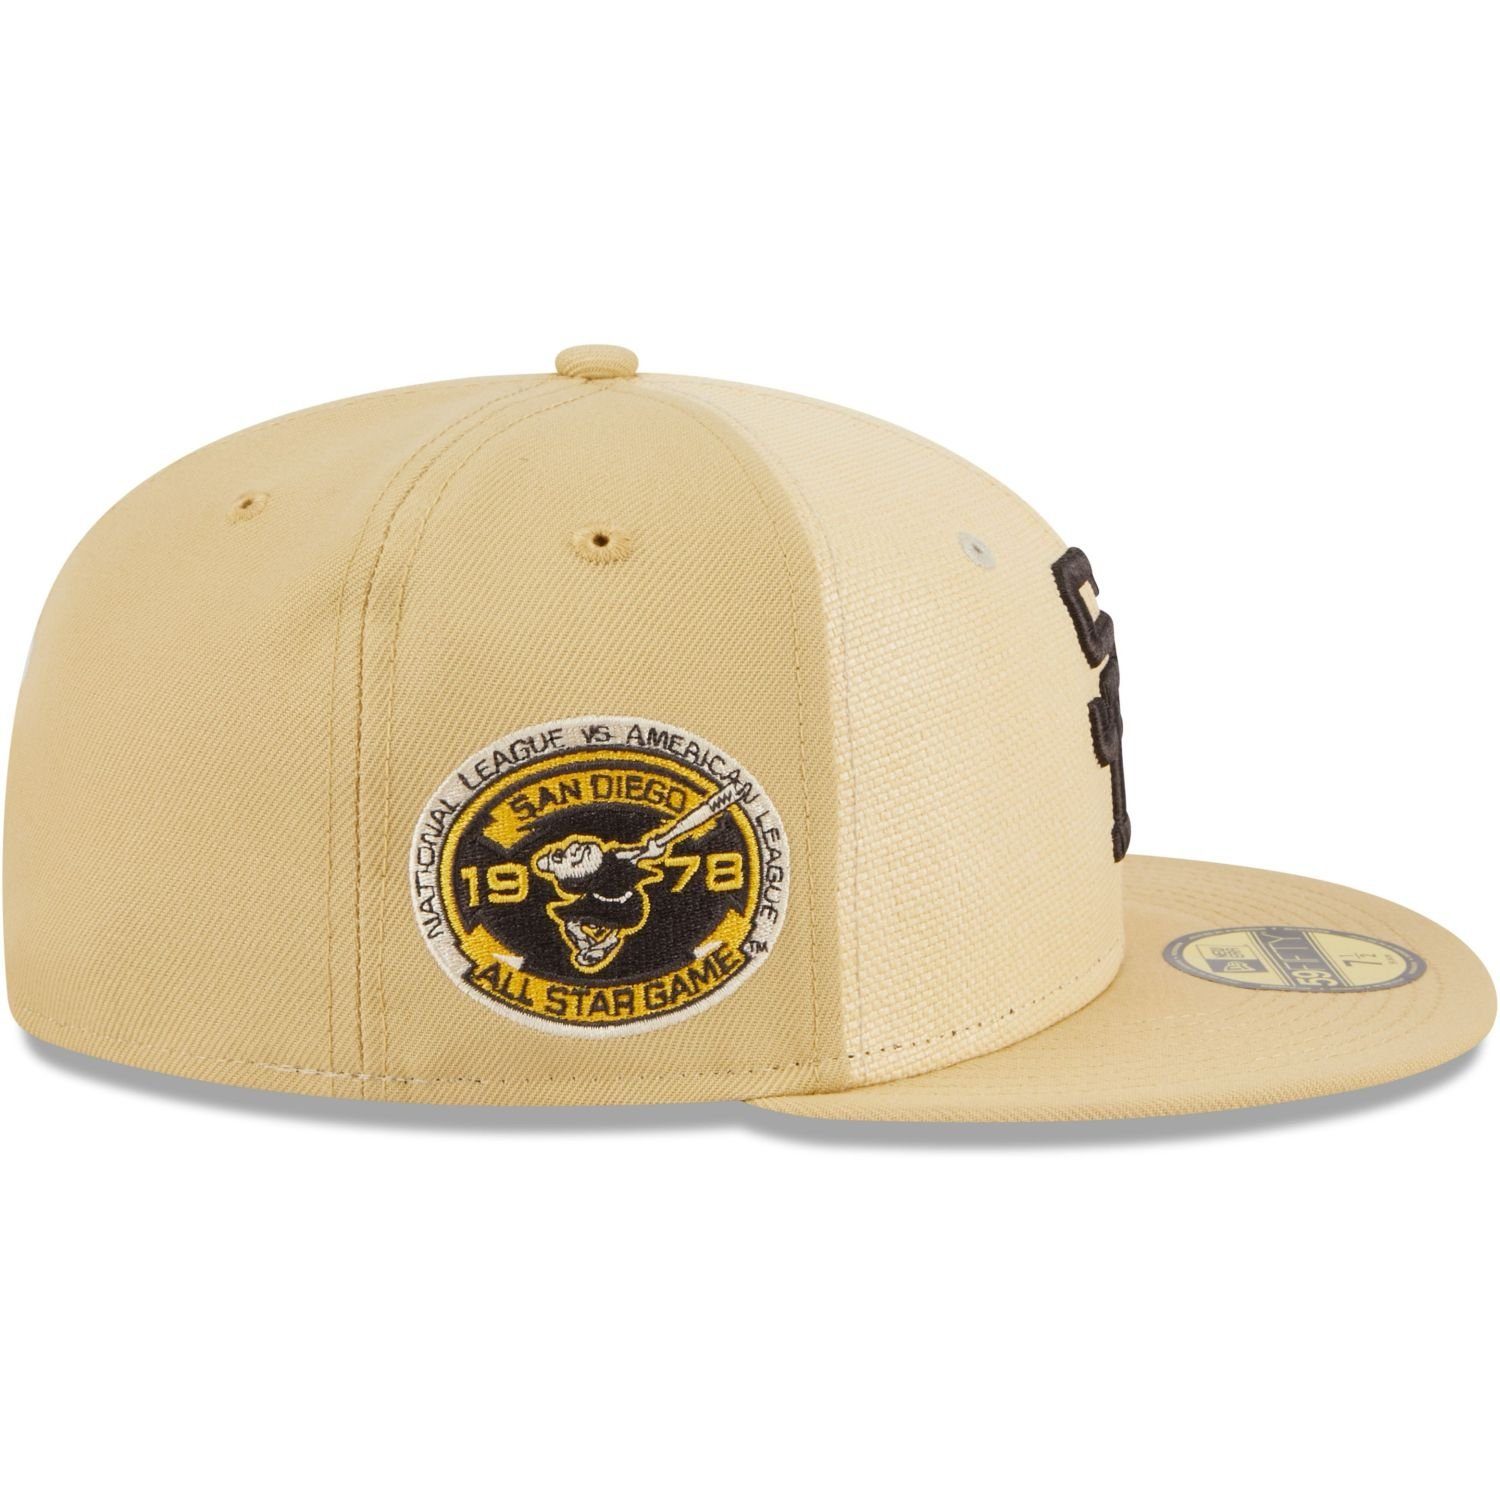 RAFFIA Cap Fitted New 59Fifty Era Diego San Padres